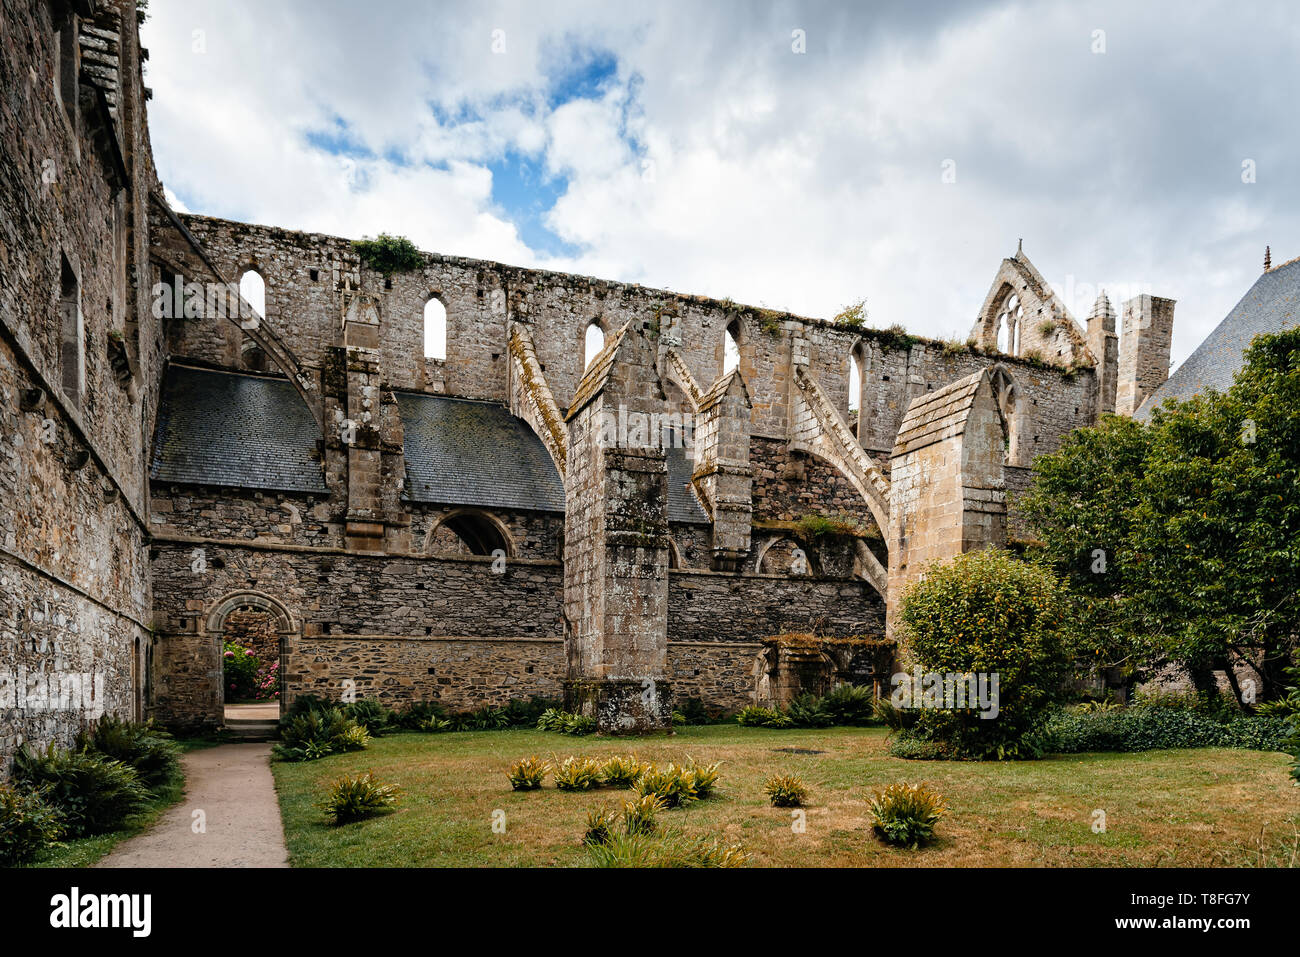 Paimpol, France - July 28, 2018: The Abbey of Beauport, Cotes-d'Armor, Brittany, France. Old Abbaye Maritime de Beauport Stock Photo